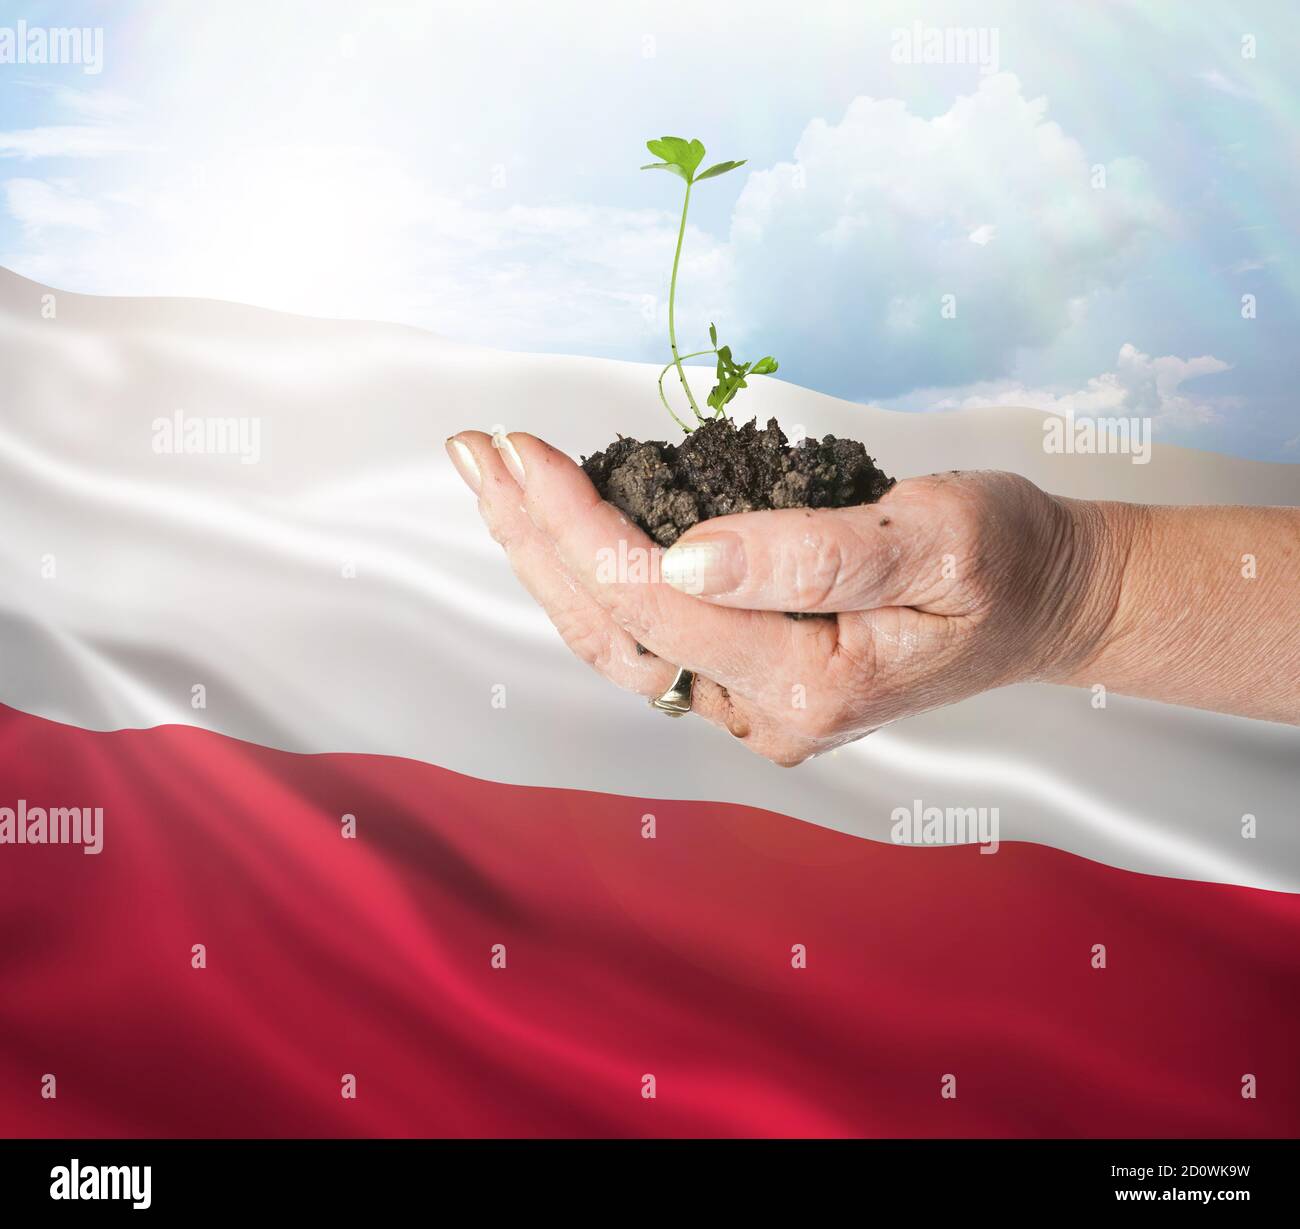 Poland growth and new beginning. Green renewable energy and ecology concept. Hand holding young plant. Stock Photo